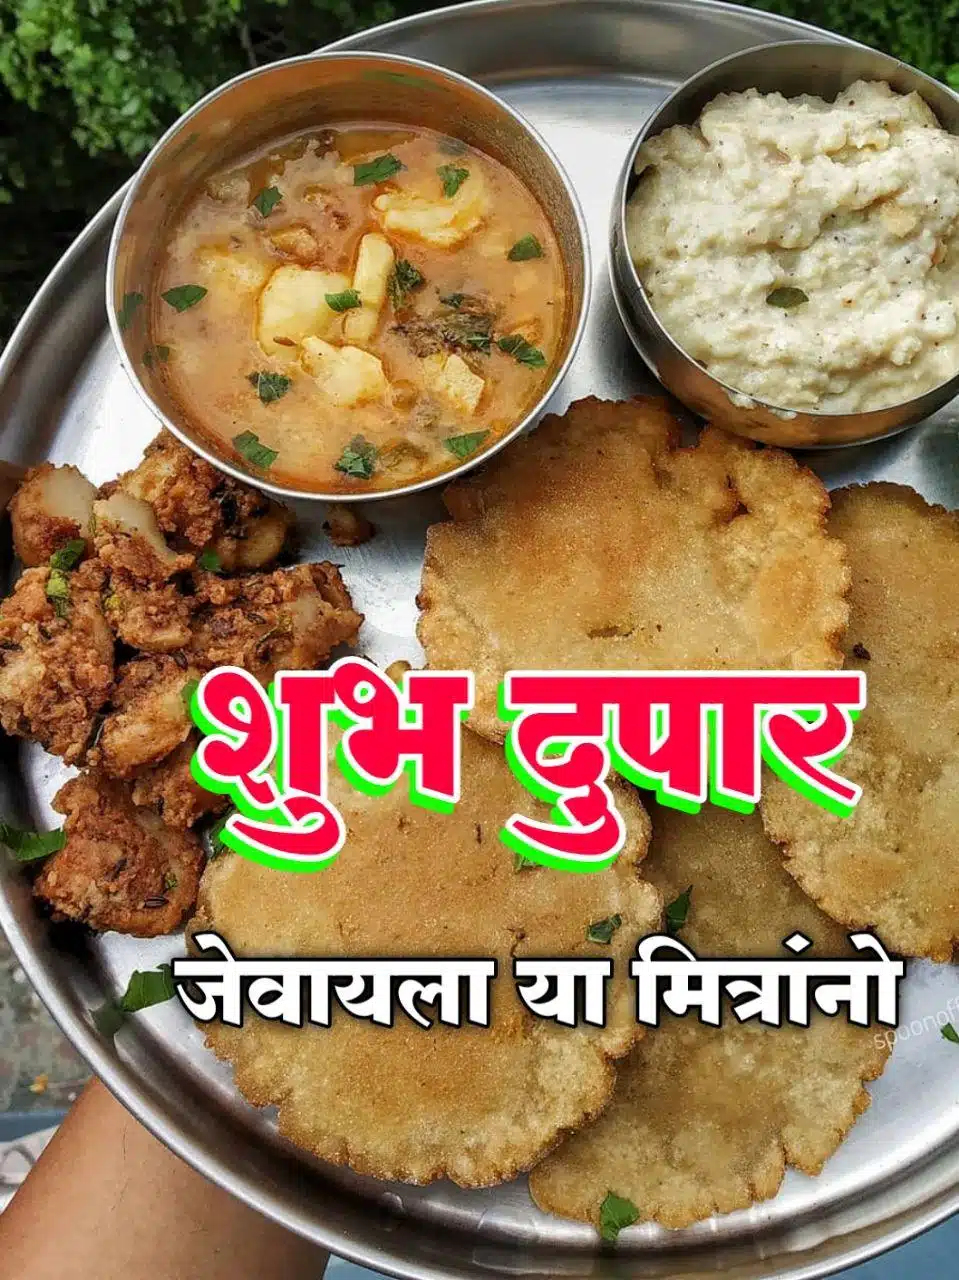 Lunch Good Afternoon In Marathi (21)